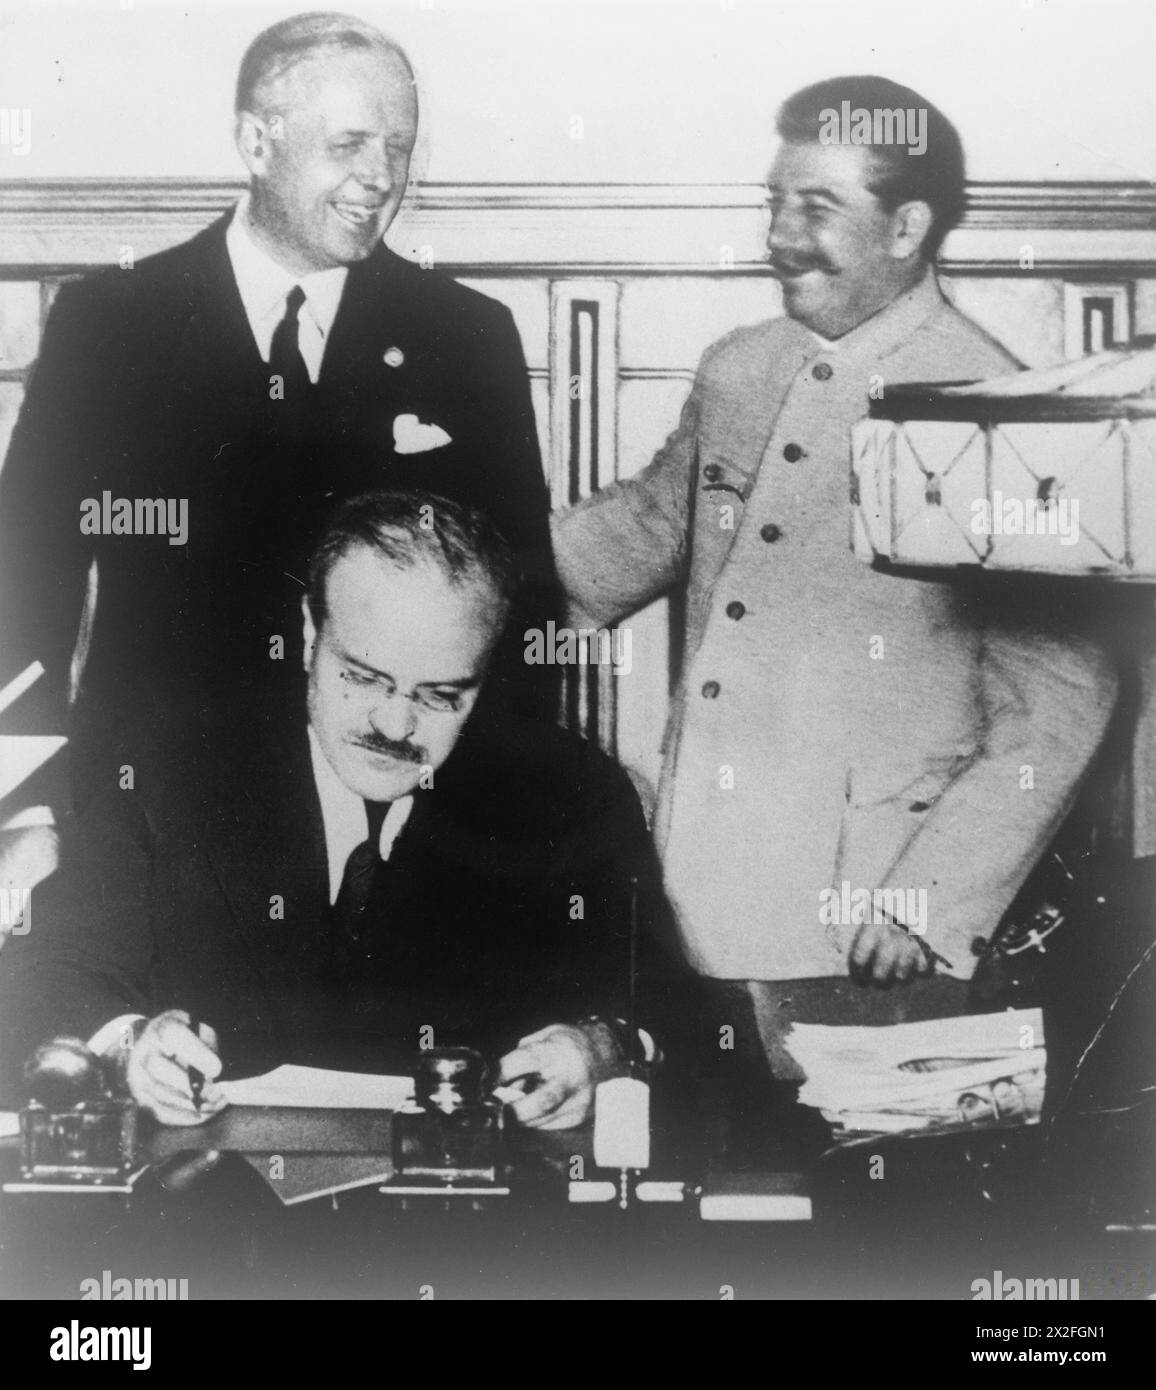 THE NAZI-SOVIET COOPERATION, 1939-1941 - Joachim von Ribbentrop, the Foreign Minister of Germany, sharing a joke with Joseph Stalin while Vyacheslav Molotov, the Soviet Foreign Minister, signing the Treaty of Friendship, Cooperation and Demarcation, the continuation of the Ribbentrop-Molotov Pact, the pact of demarcation of Europe, 28 September 1939 Stalin, Joseph, Molotov, Vyacheslav Mikhailovich, Ribbentrop, Joachim von Stock Photo